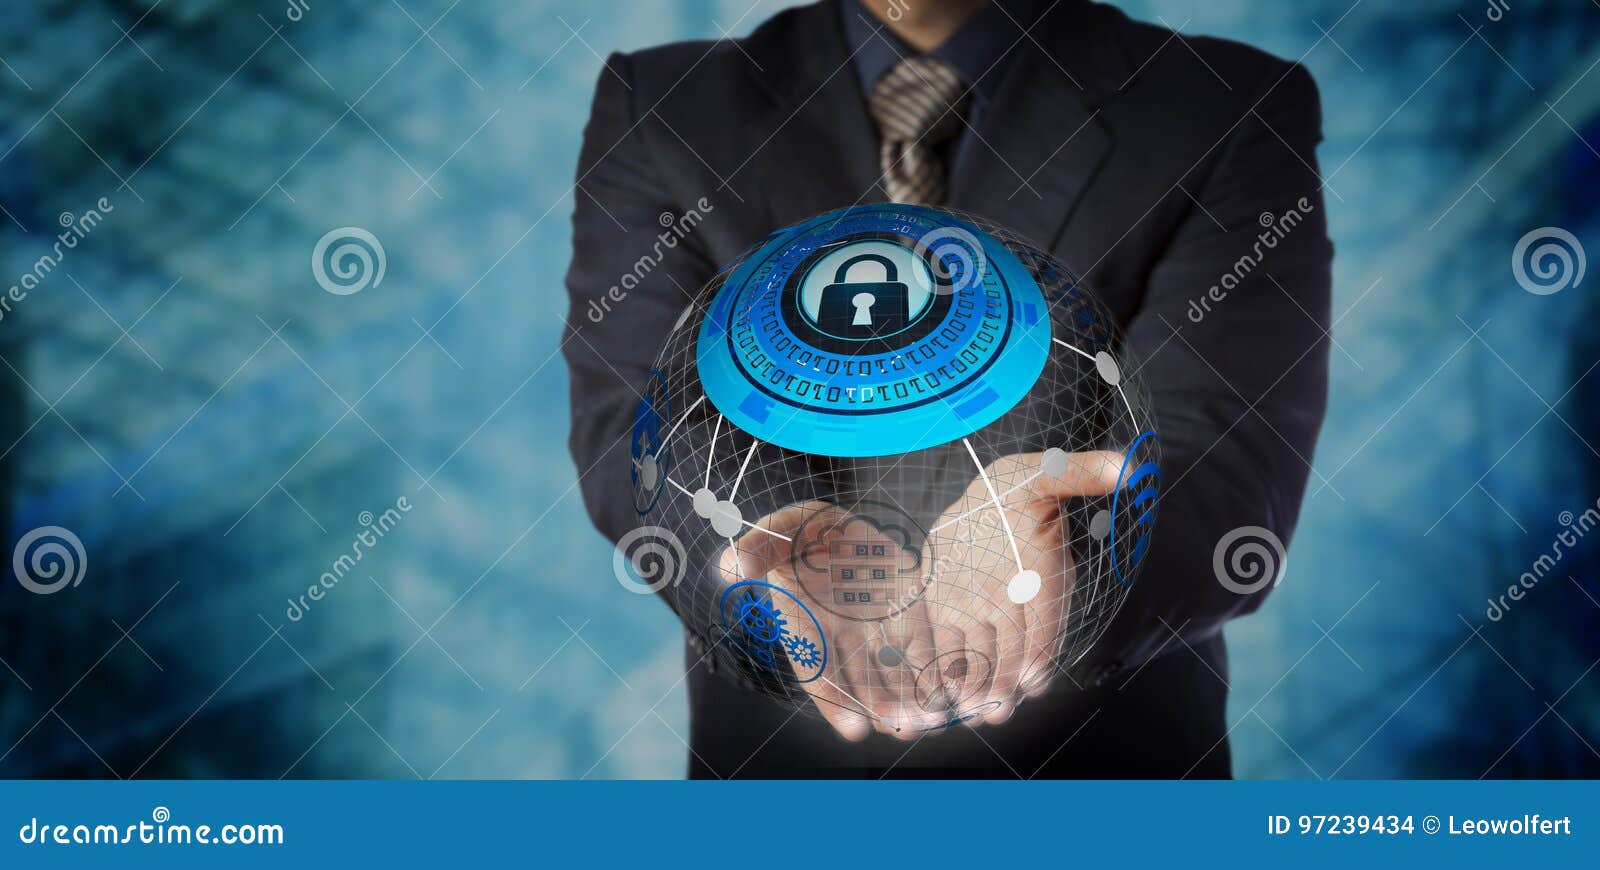 man offering secure managed data storage services